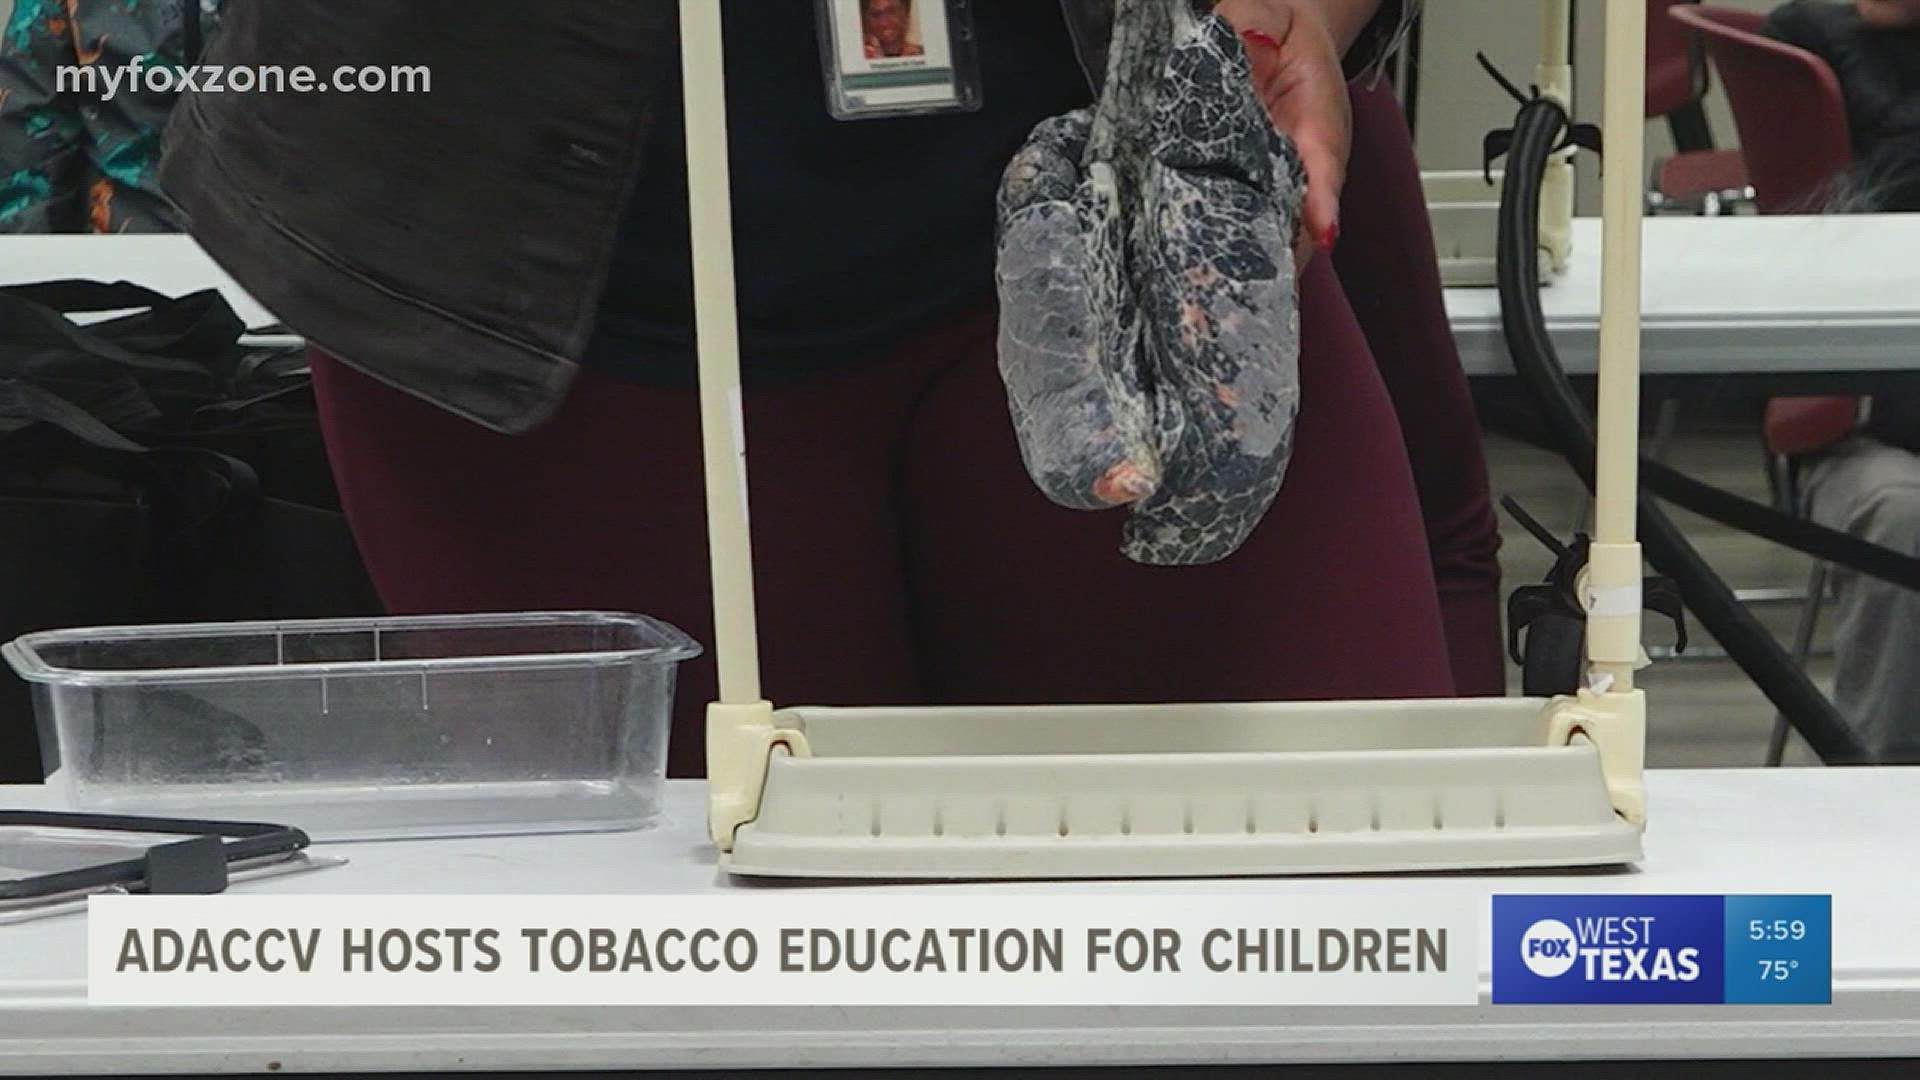 A West Texas drug and alcohol abuse program hosted a tobacco education presentation for children this week.